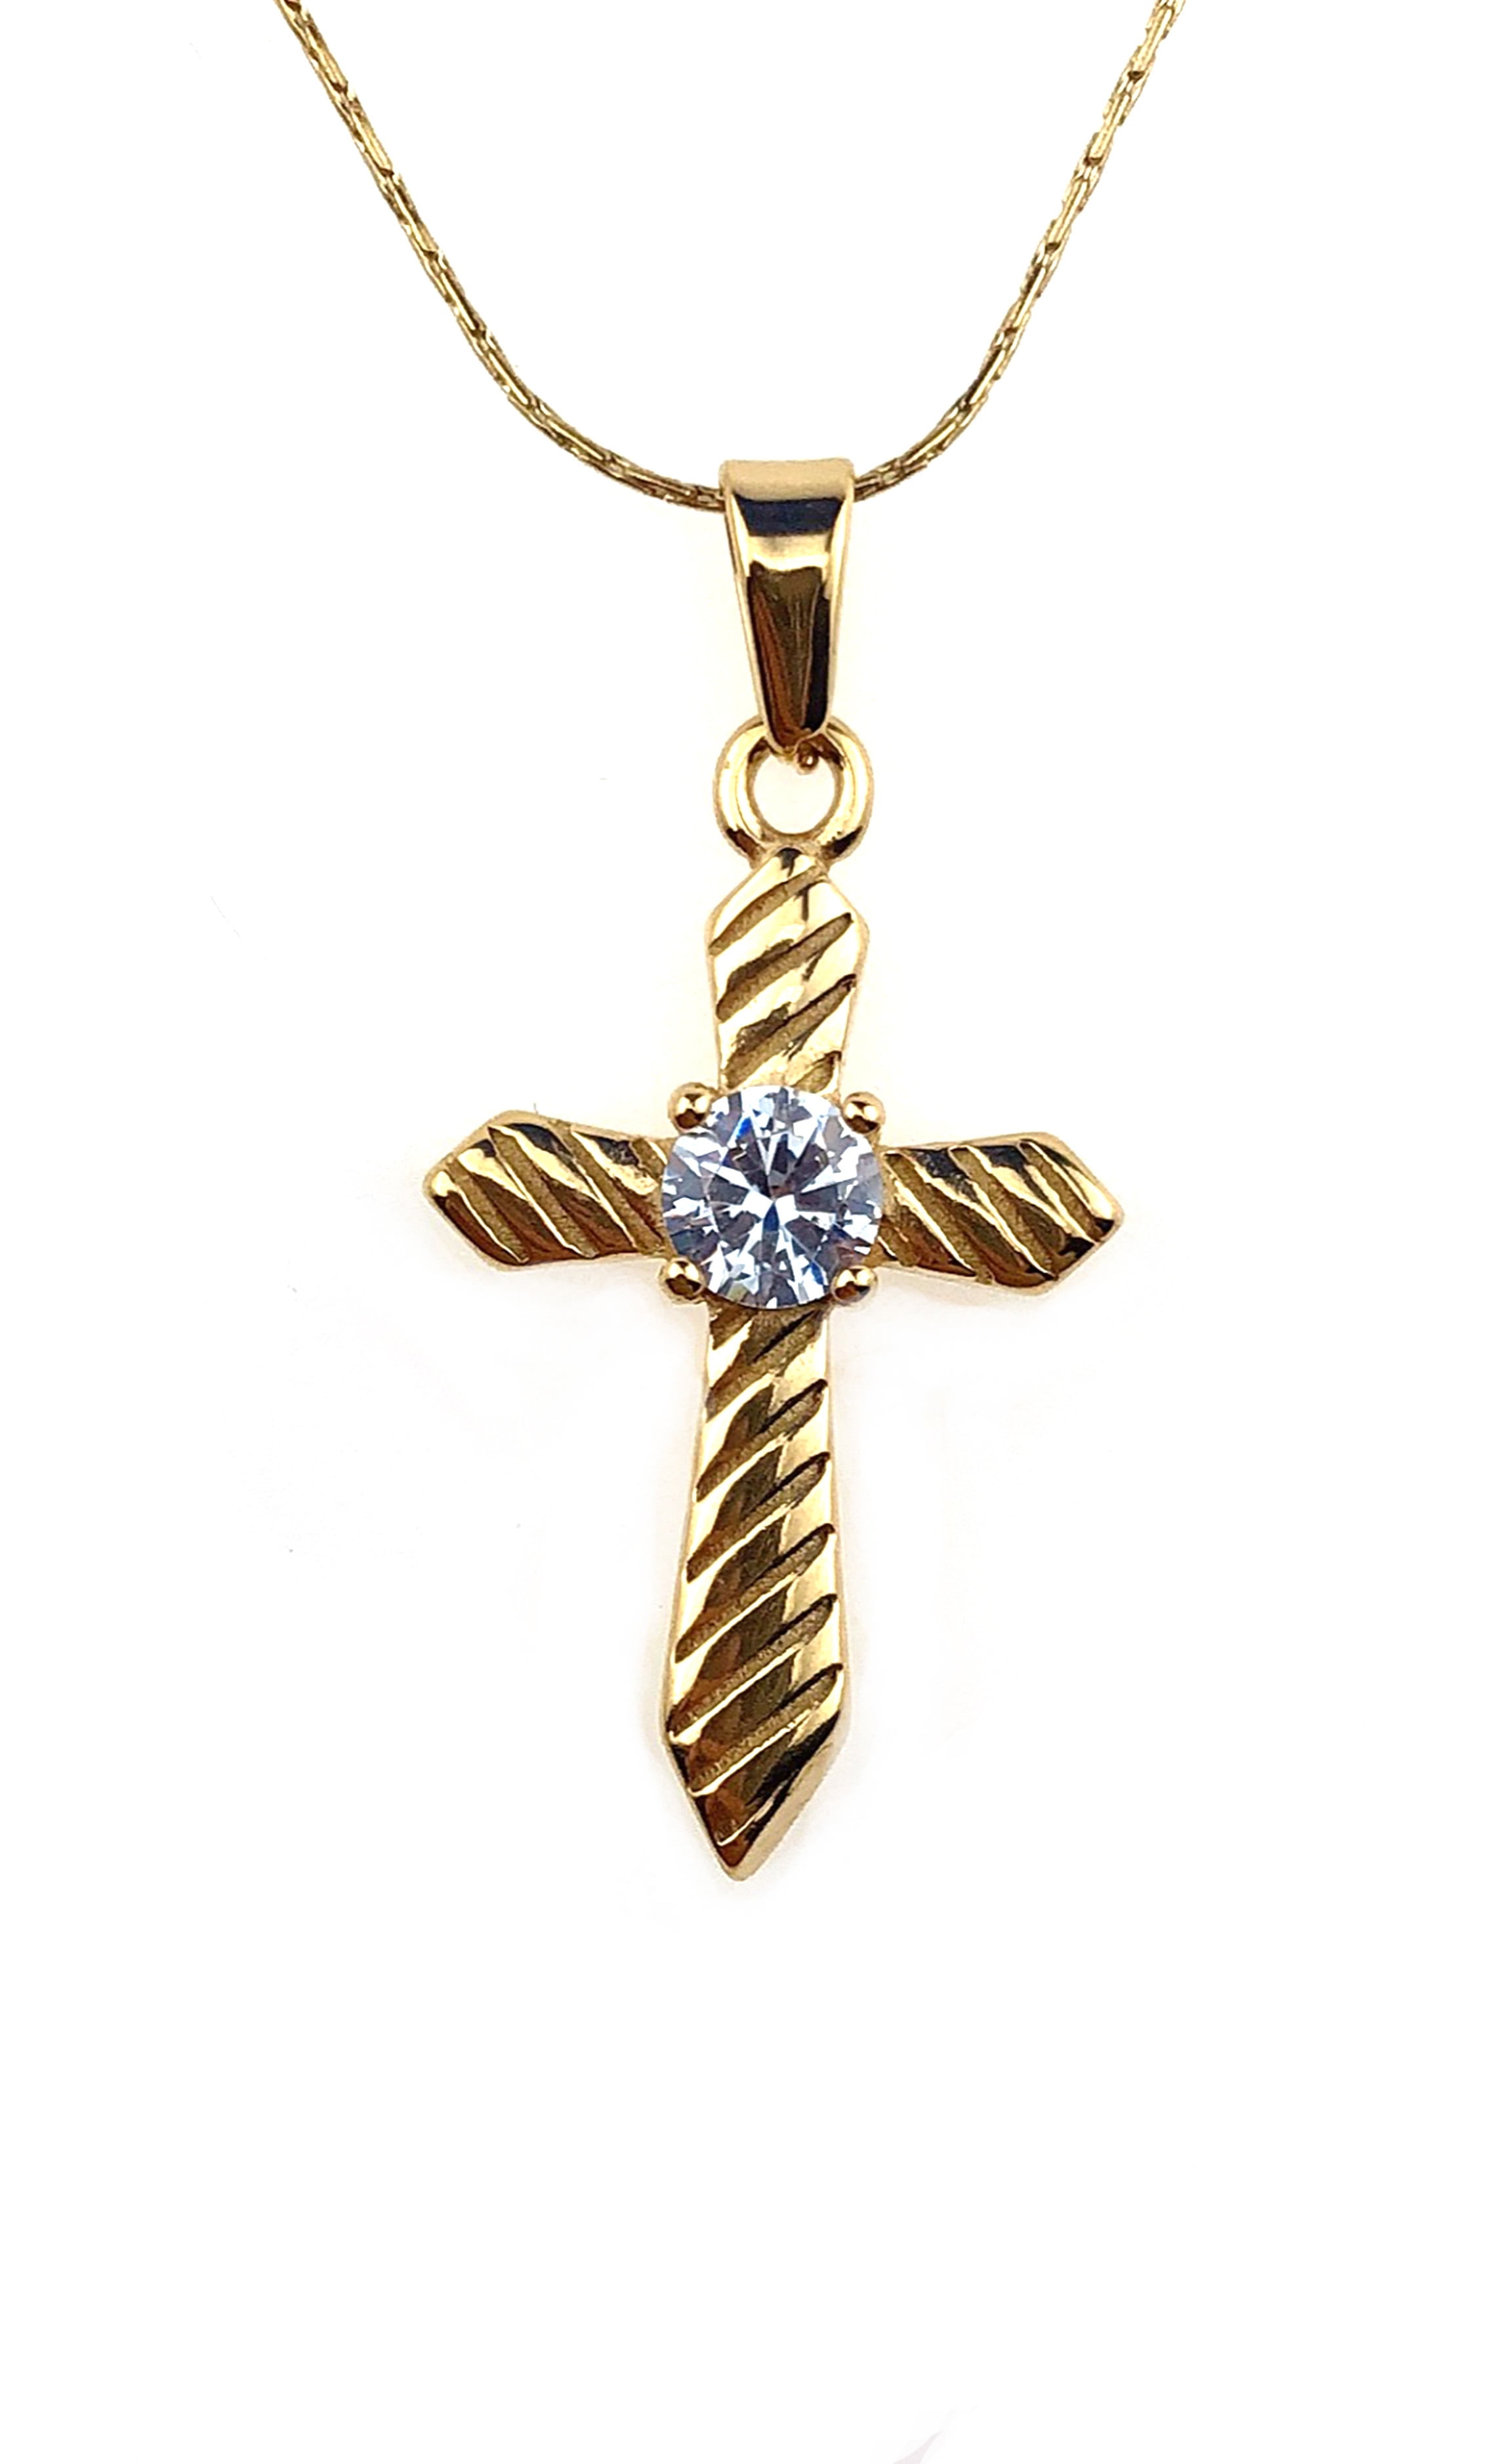 Wedding Jewelry Cross Cut Yellow Gold Plated Pendant Necklace 